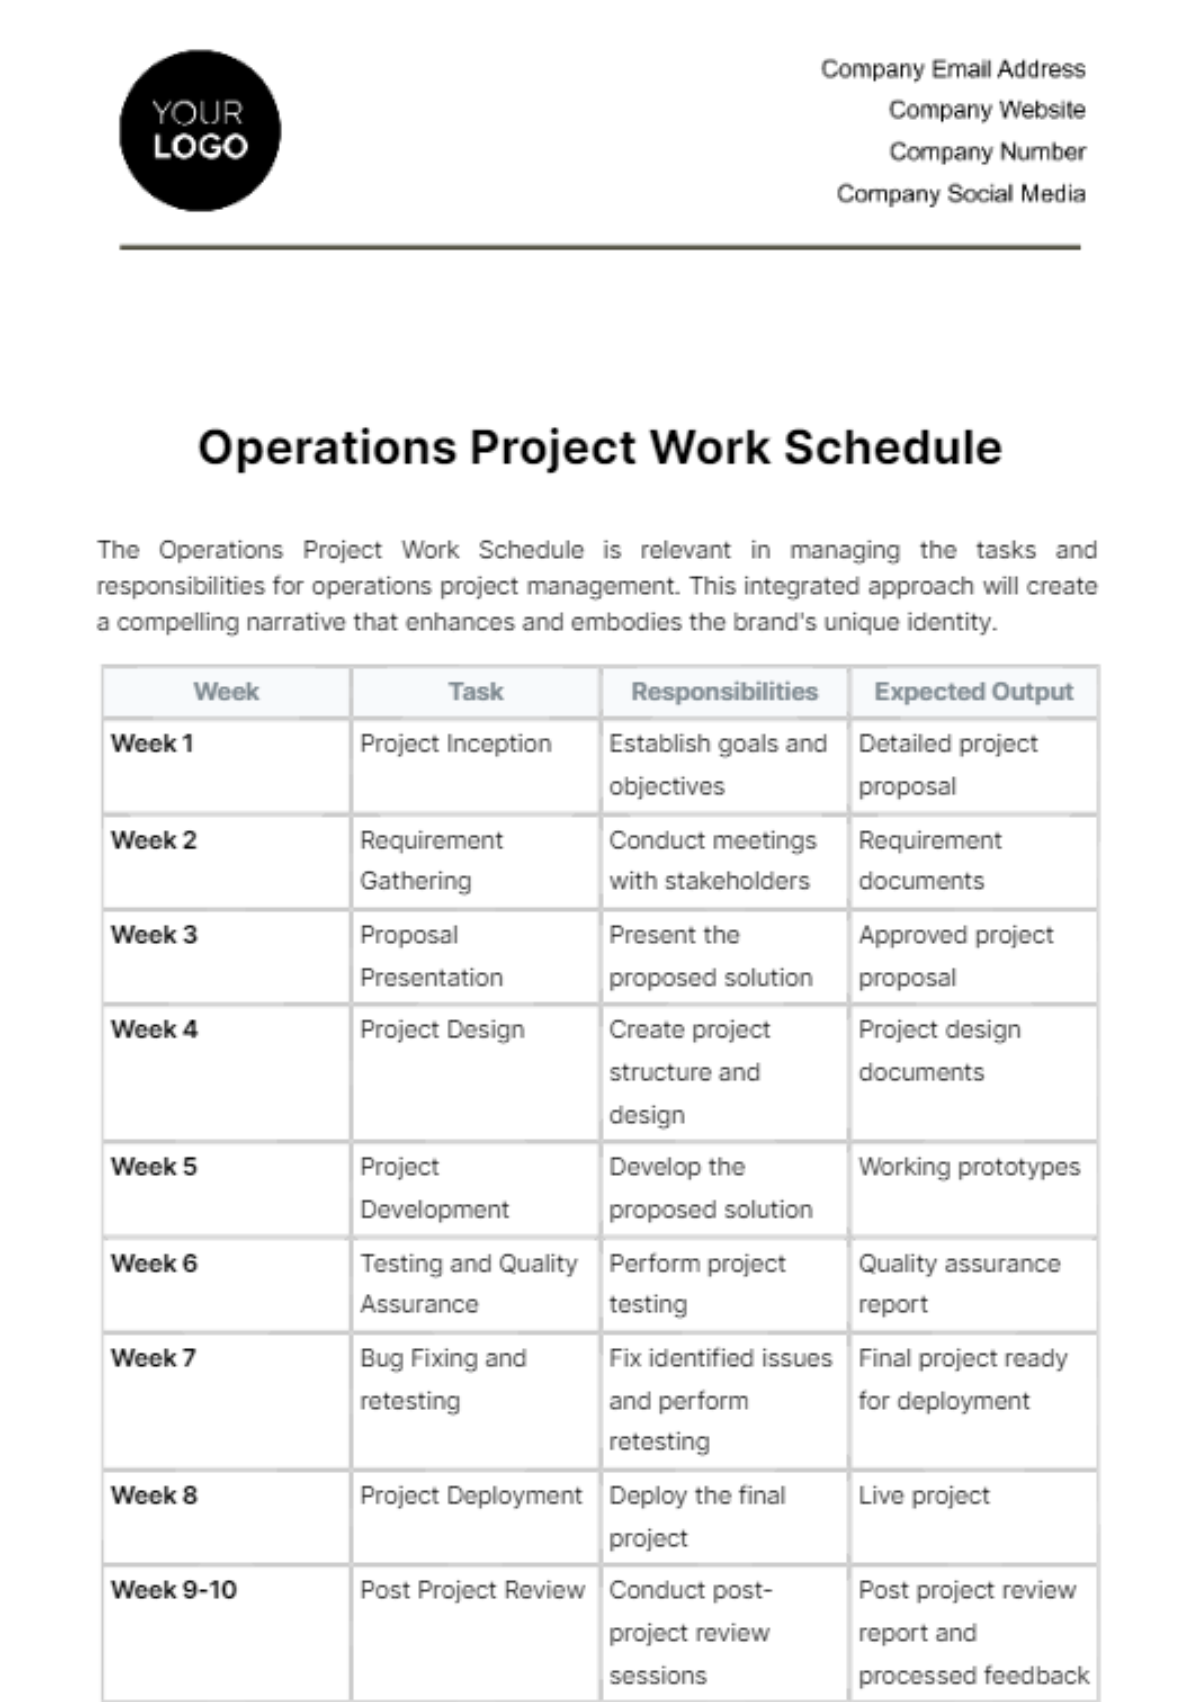 Operations Project Work Schedule Template